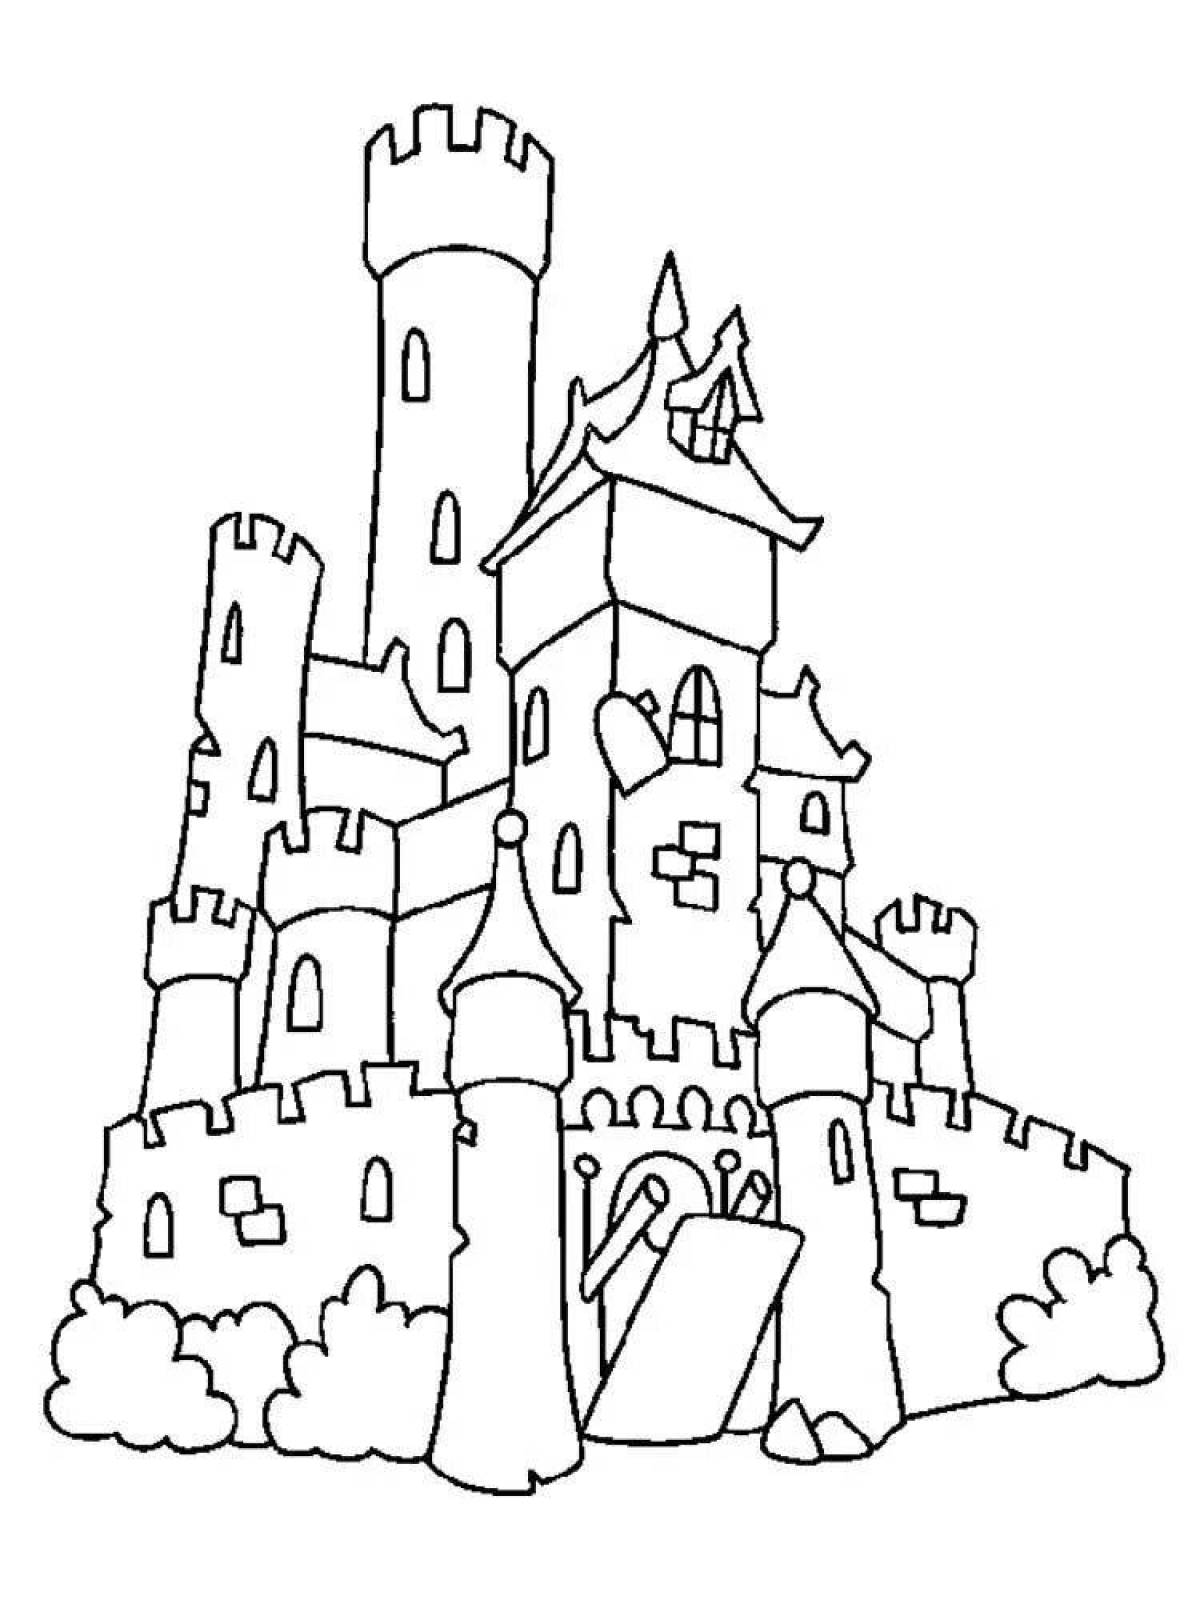 Exquisite fortress coloring page